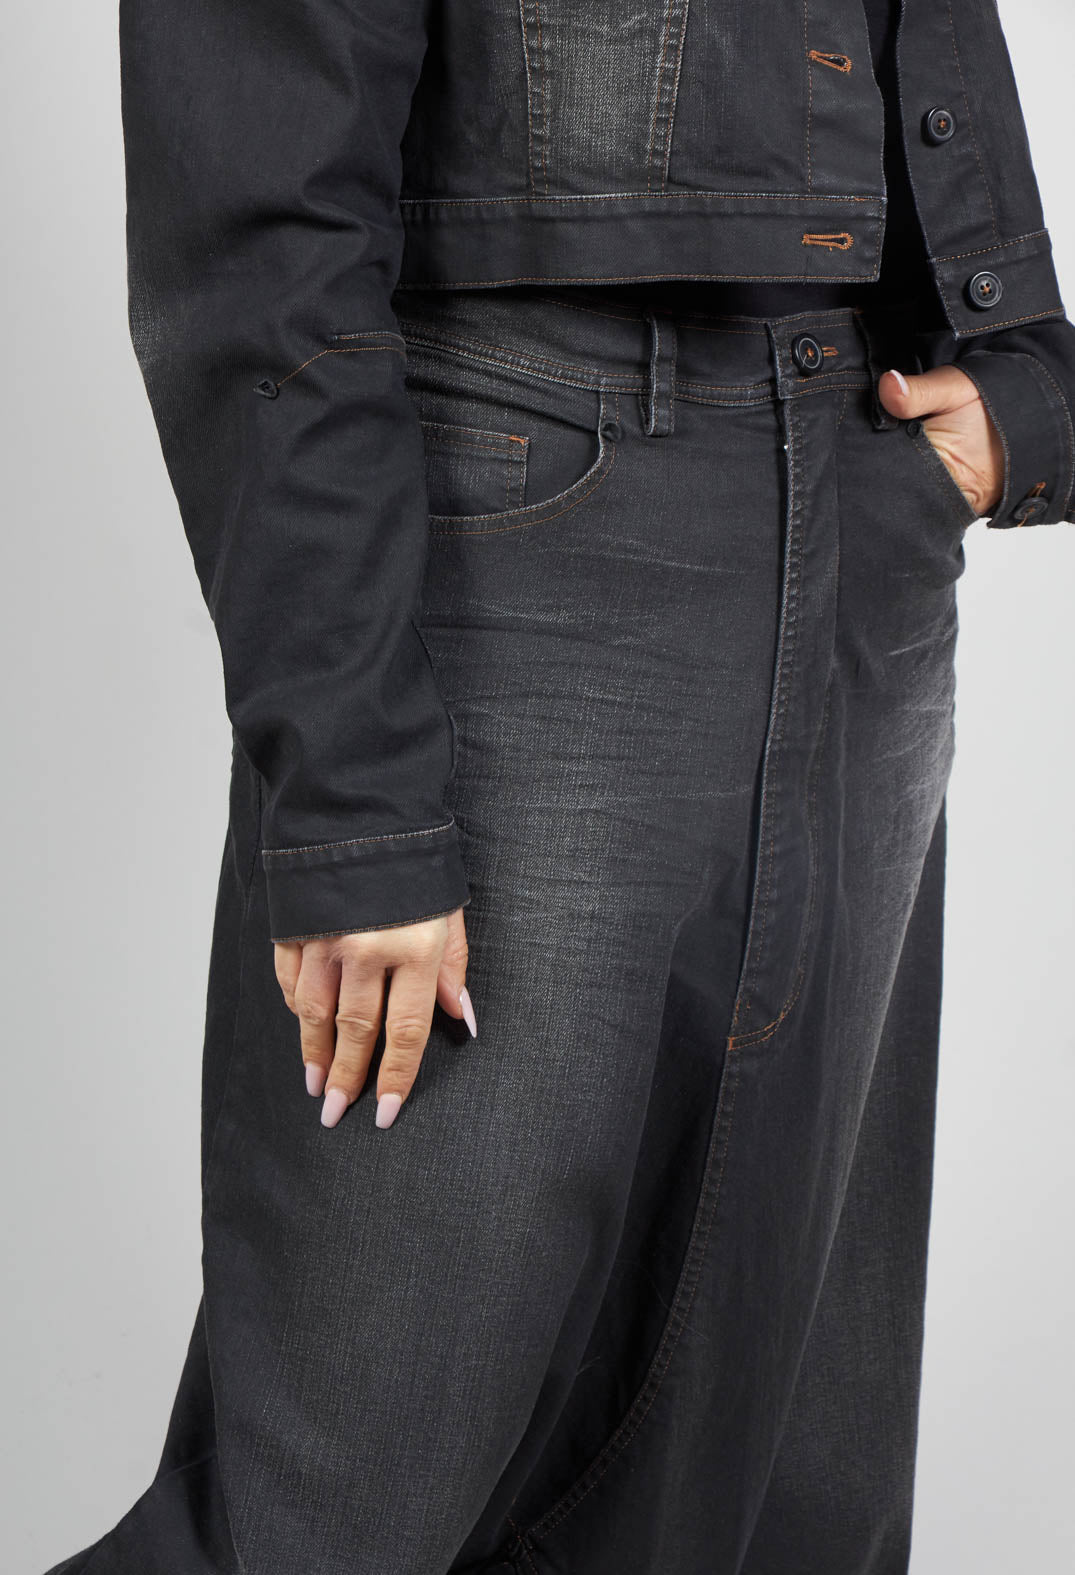 Drop Crotch Trousers in Black Jeans